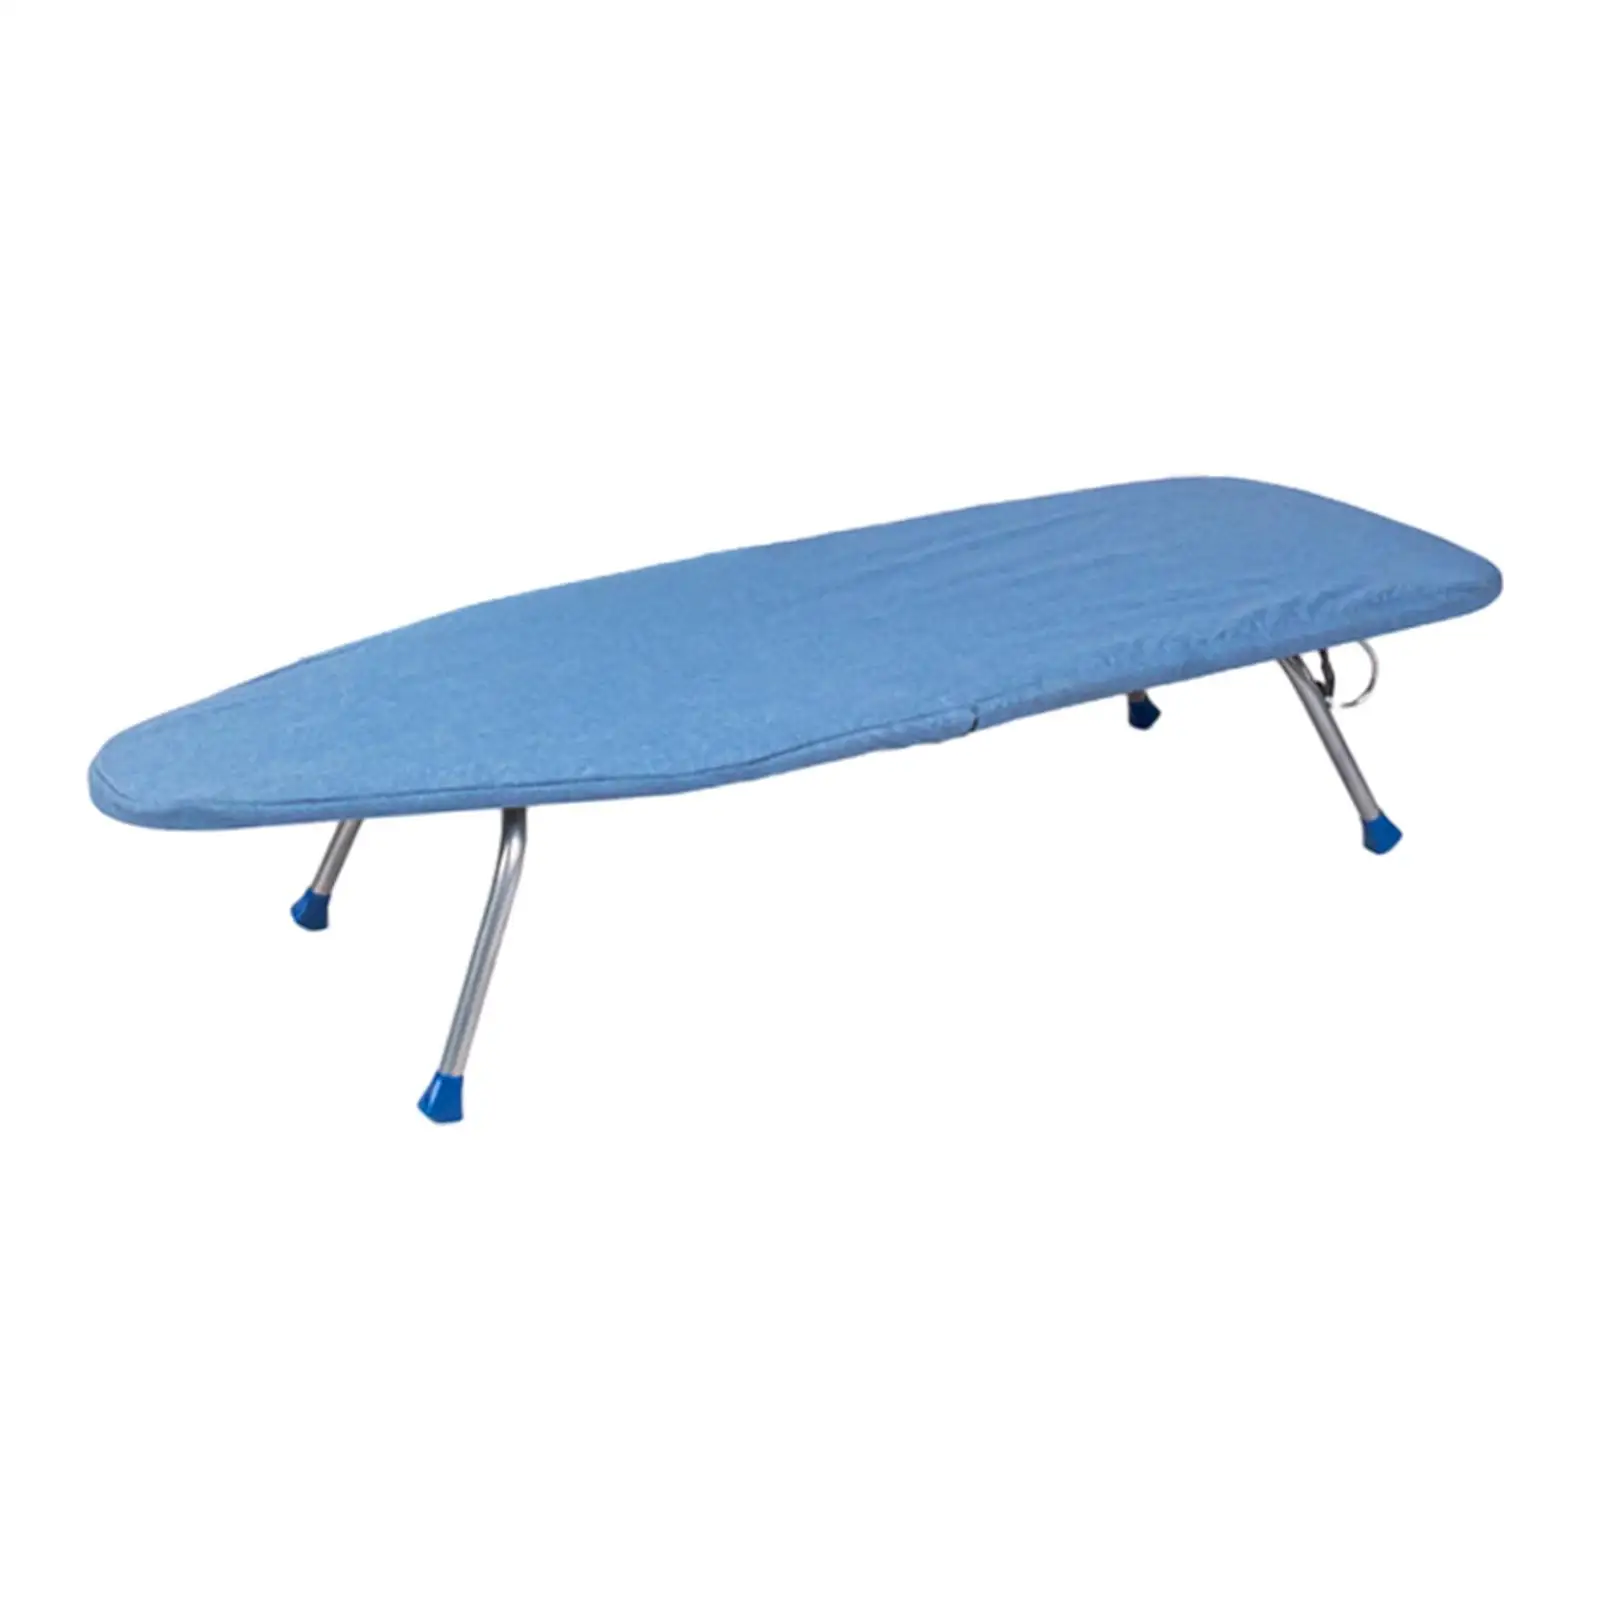 Tabletop Ironing Board Heat Resistant Cover Space Saving Portable Ironing Table for Household Travel Laundry Room Sewing